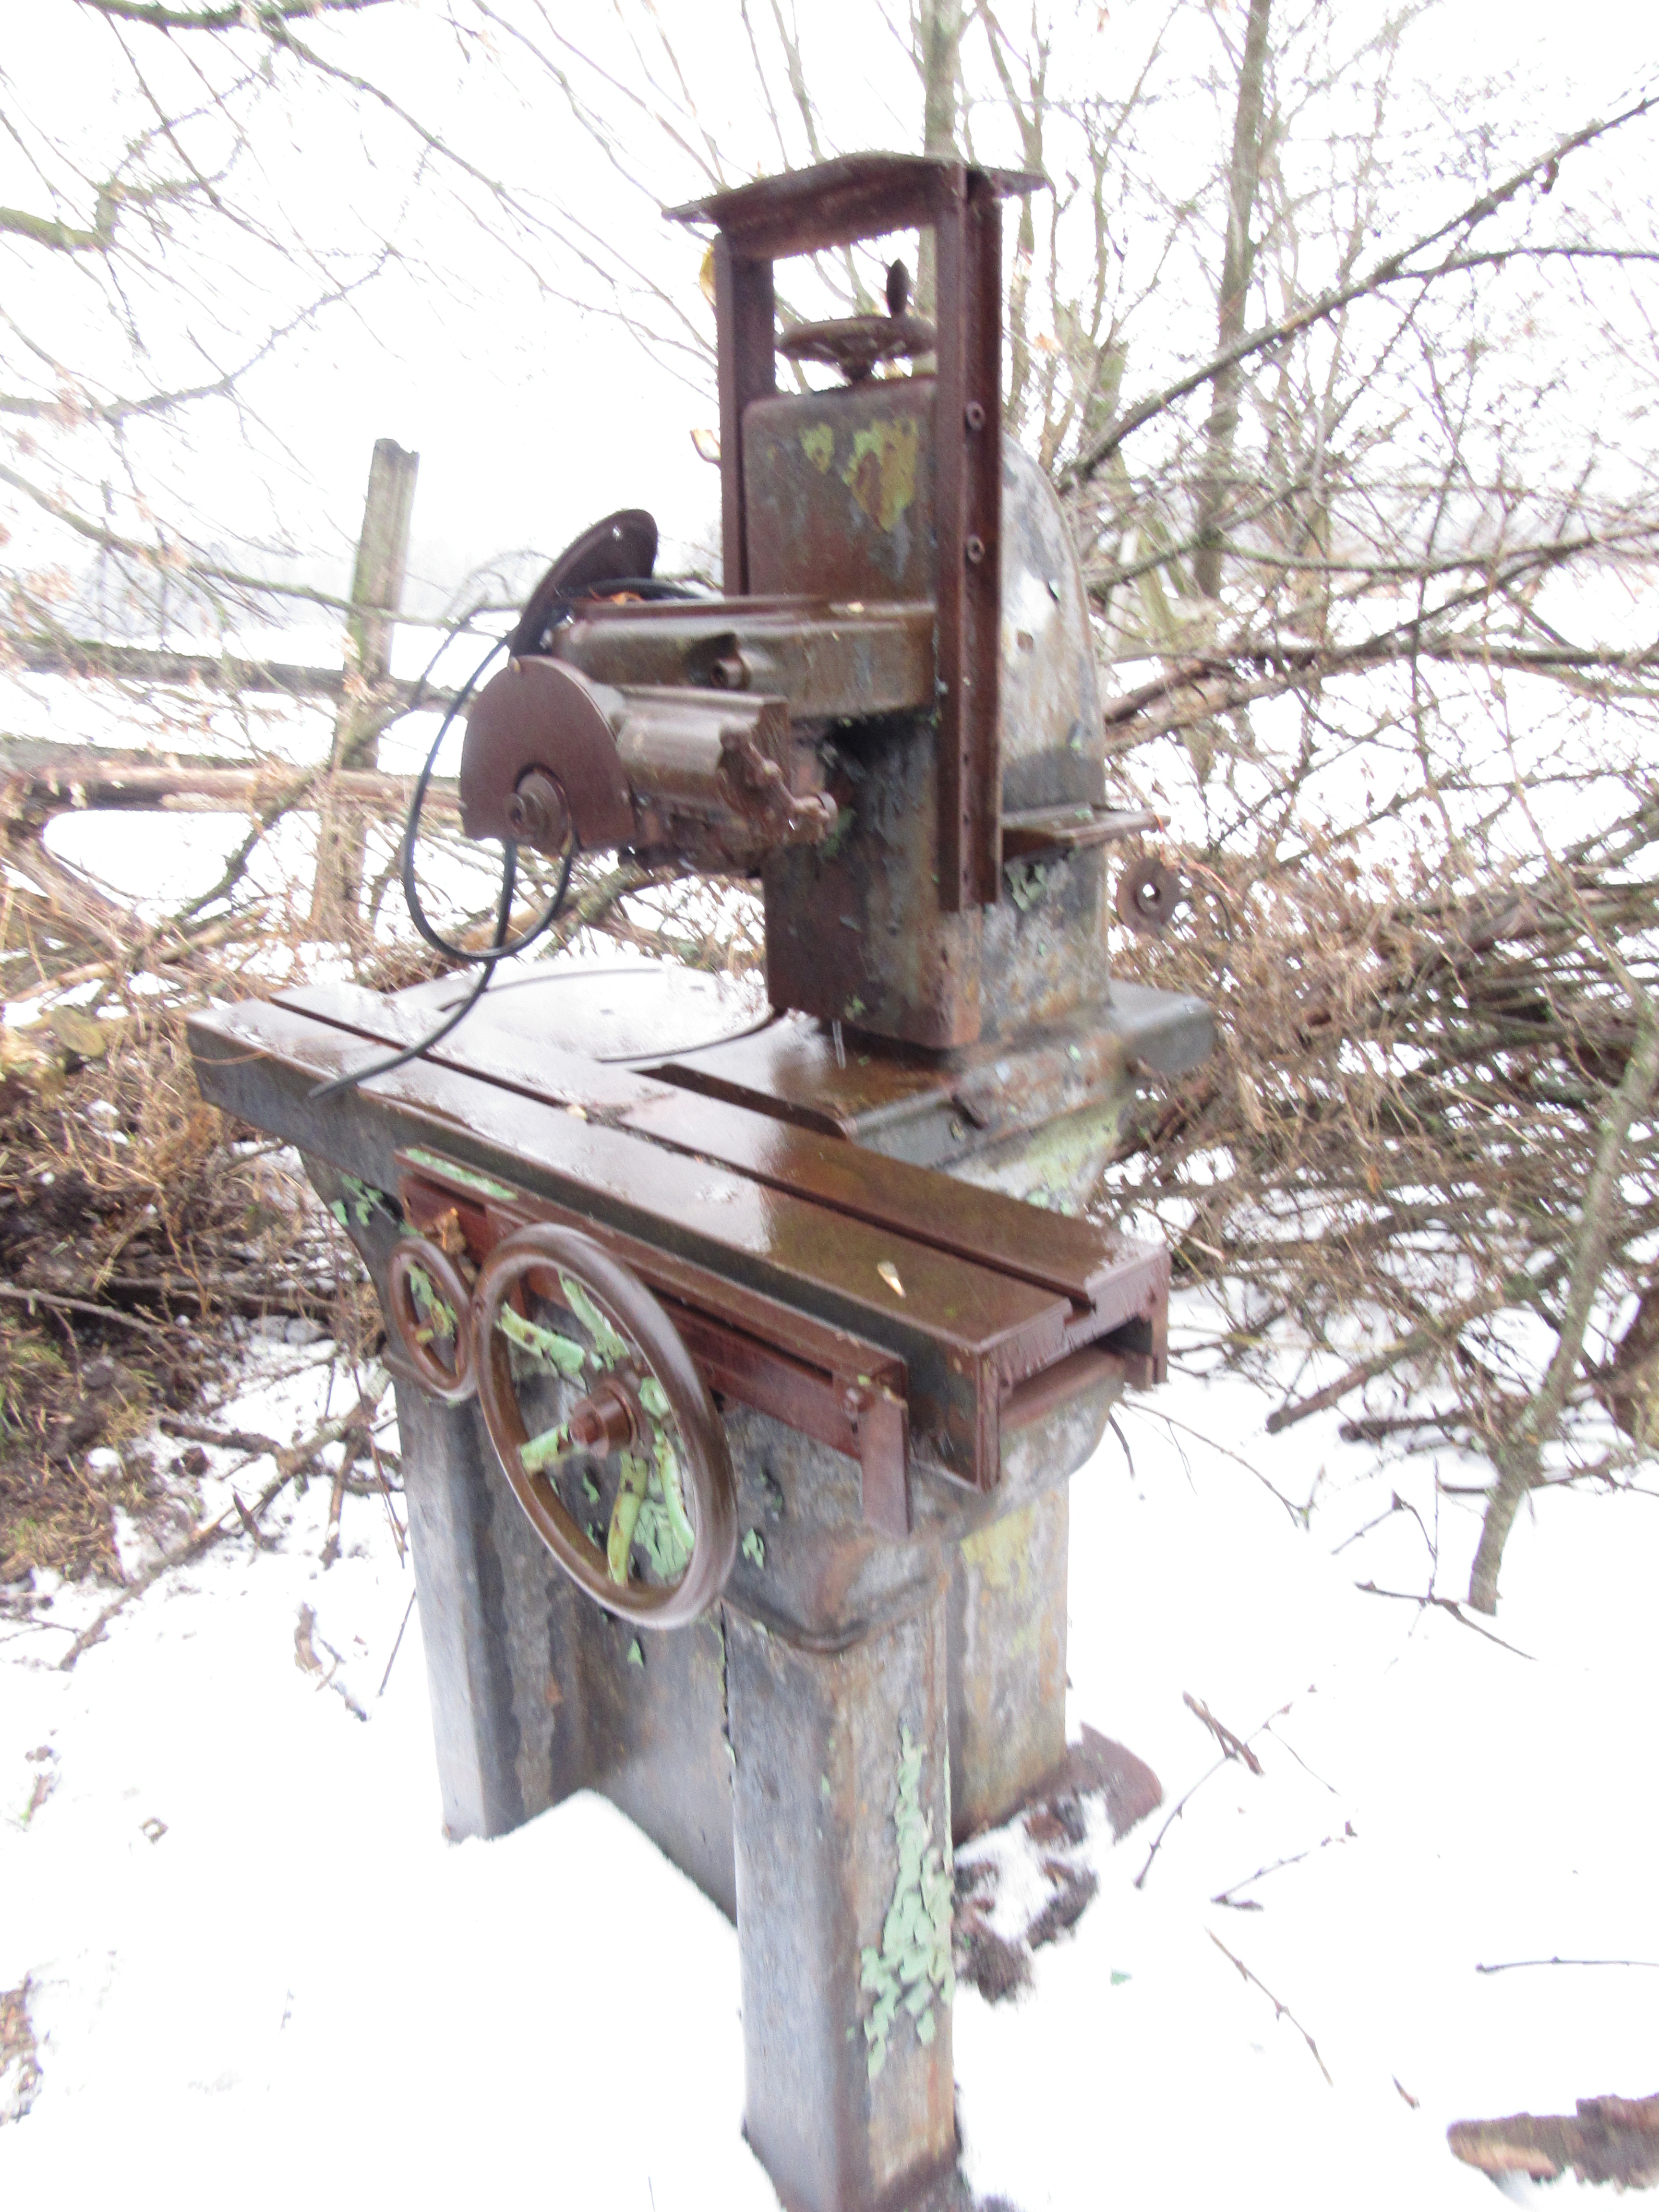 http://antiquemachinery.com/images-2020/IMG_0745-Antique-Old-Vintage-Machines-I-Bought-are-home-safe-Union-Twist-Drill-Co-cutter-grinder-corner.JPG